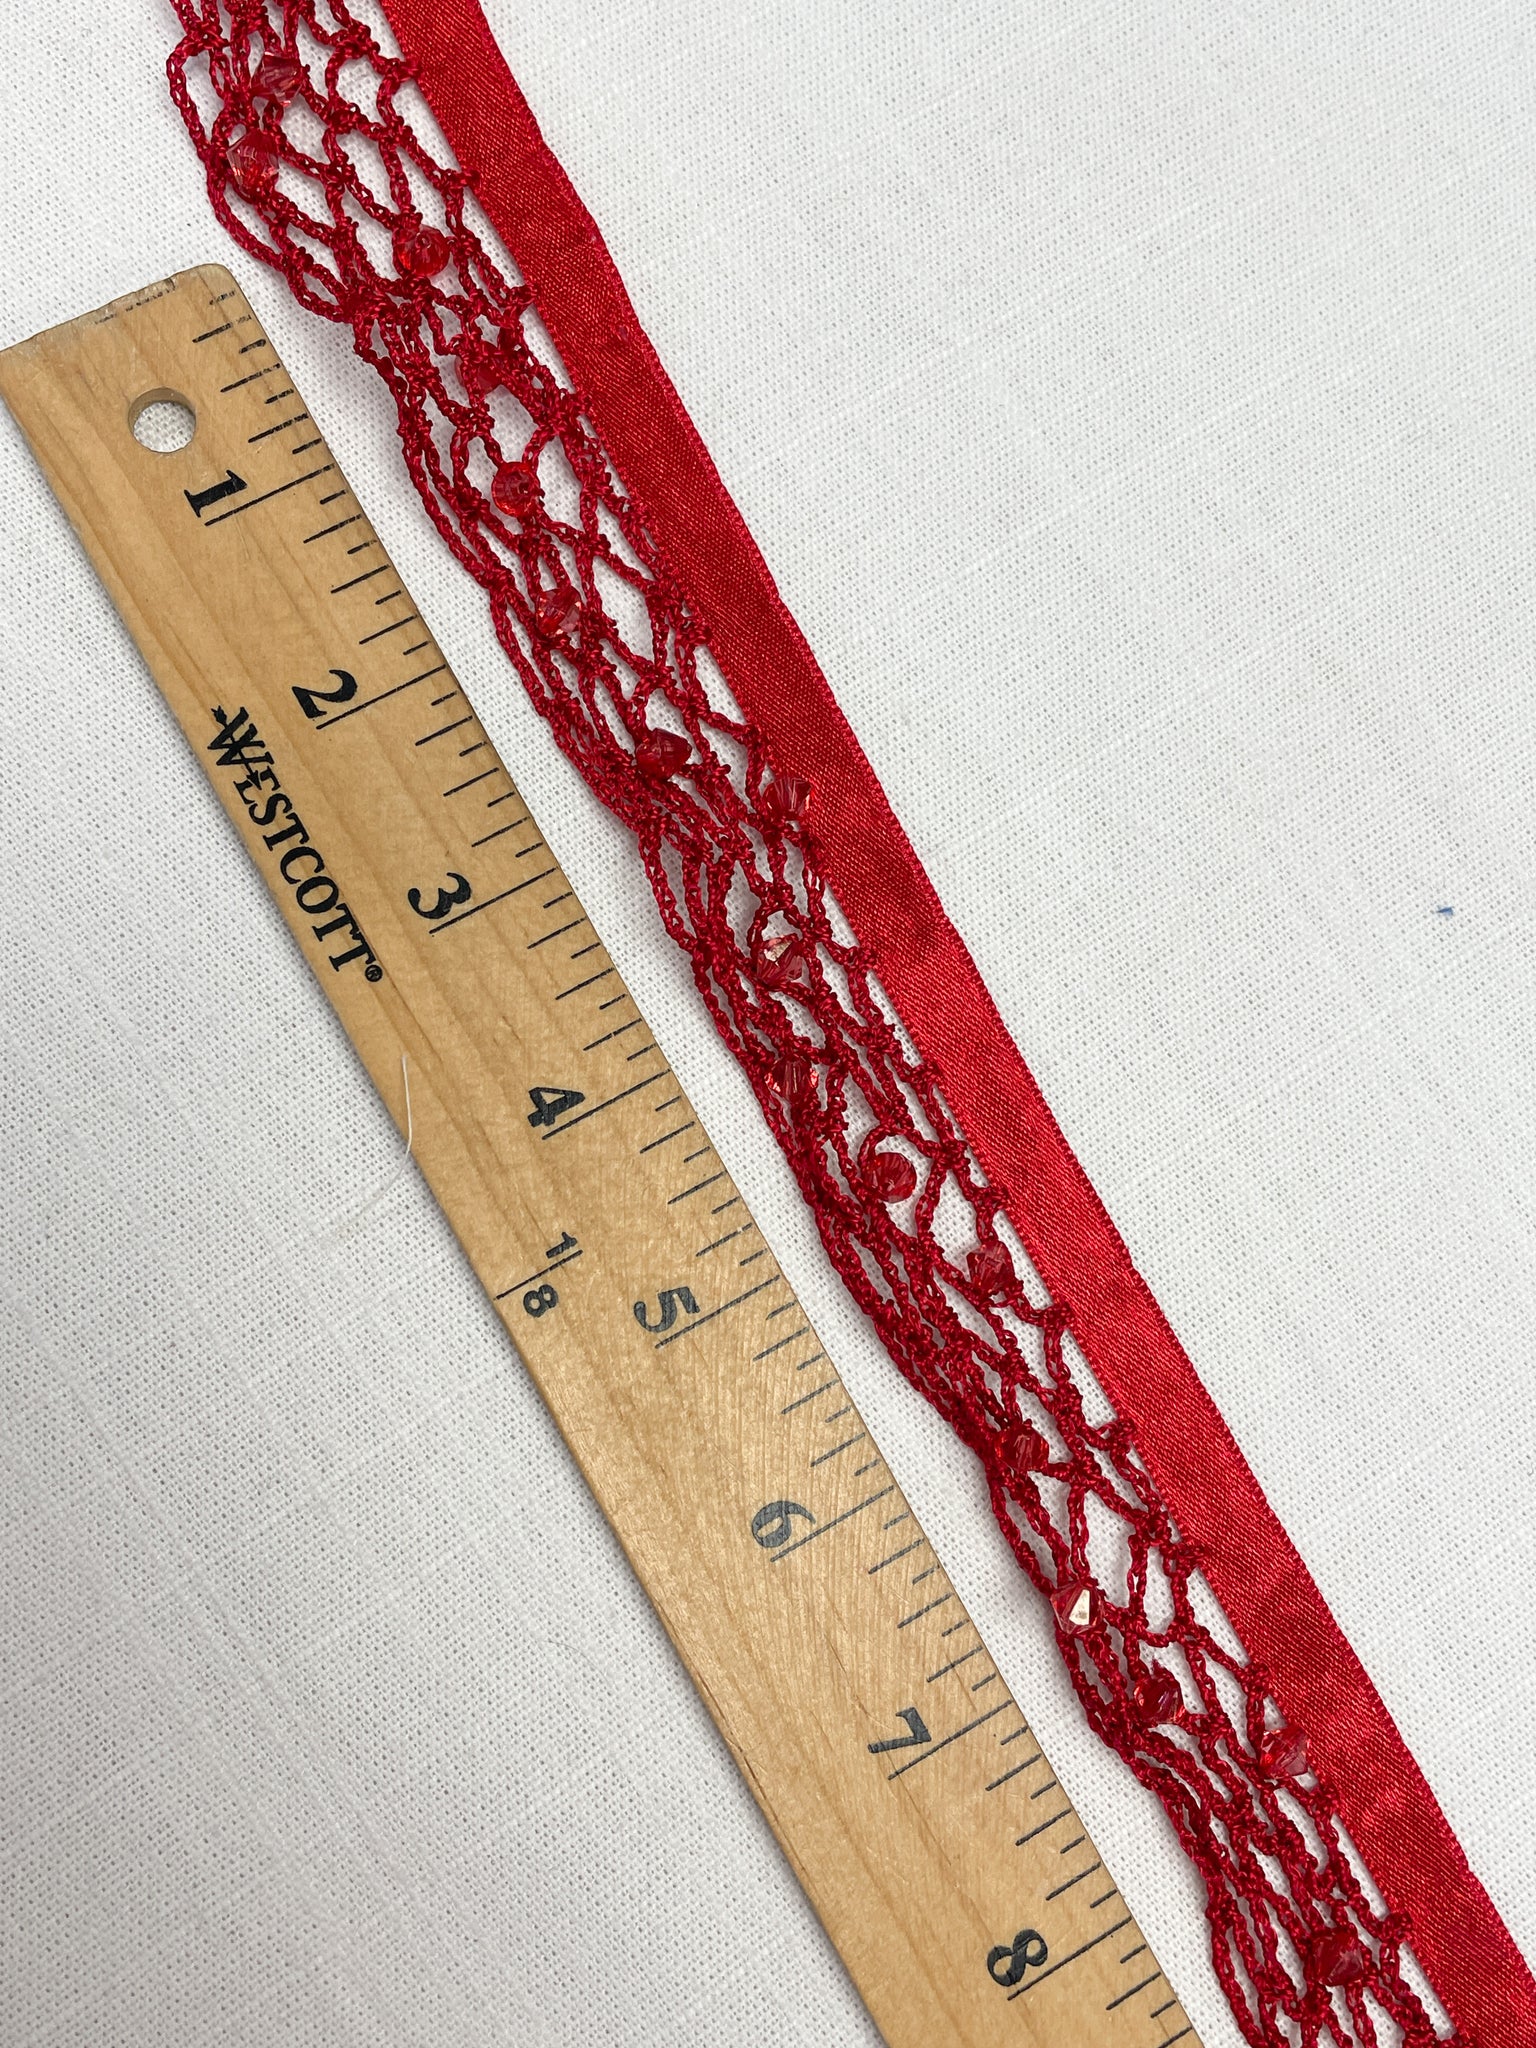 5 YD Polyester Net Trim with Faceted Beads - Red